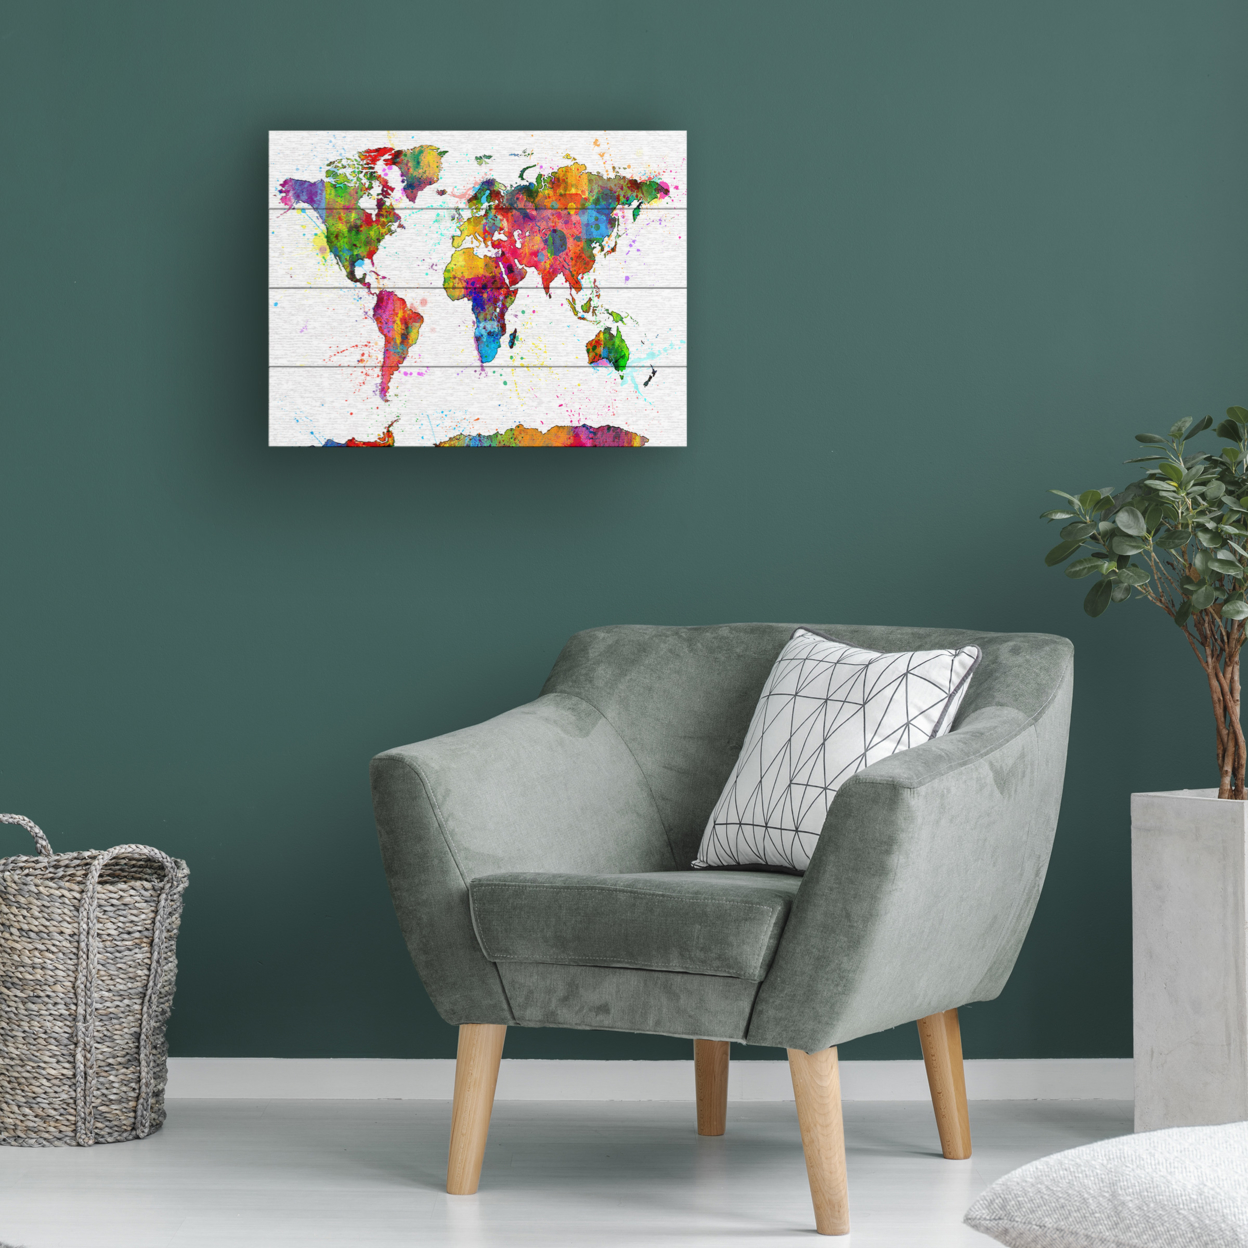 Wall Art 12 X 16 Inches Titled Map Of The World Watercolor Ready To Hang Printed On Wooden Planks